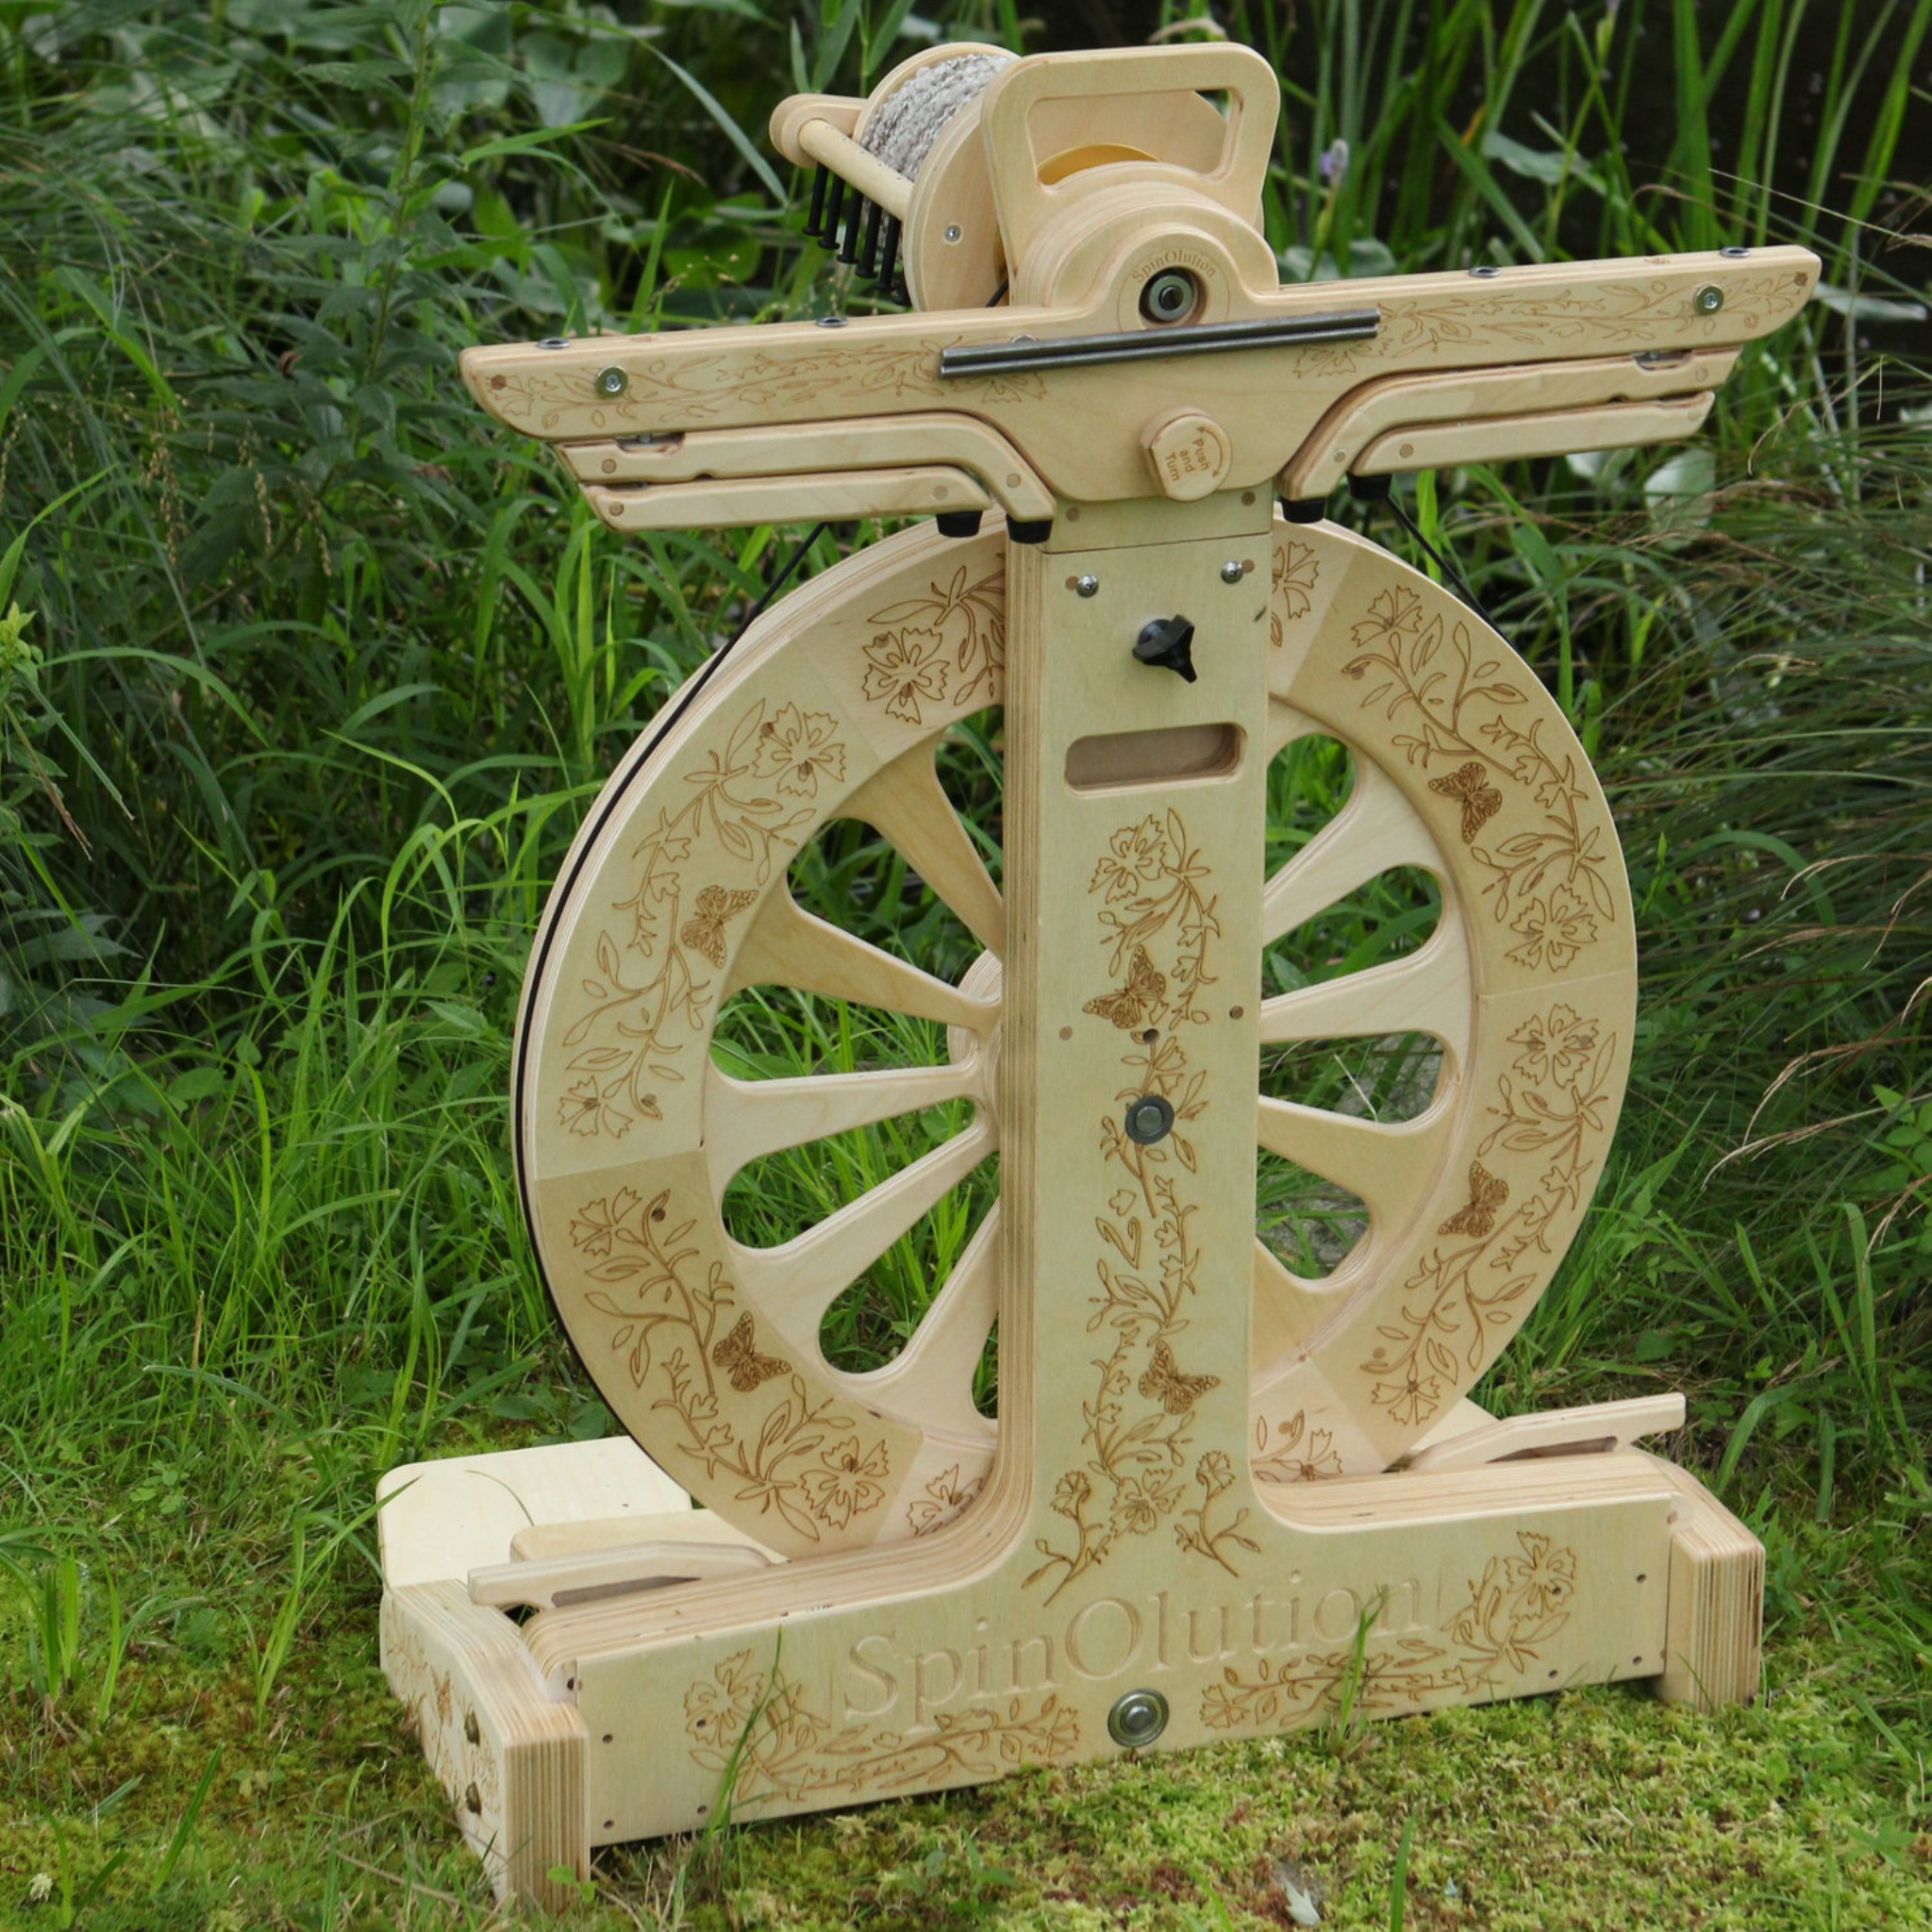 Laser Engraved SpinOlution Monarch Spinning Wheel - Audience Side